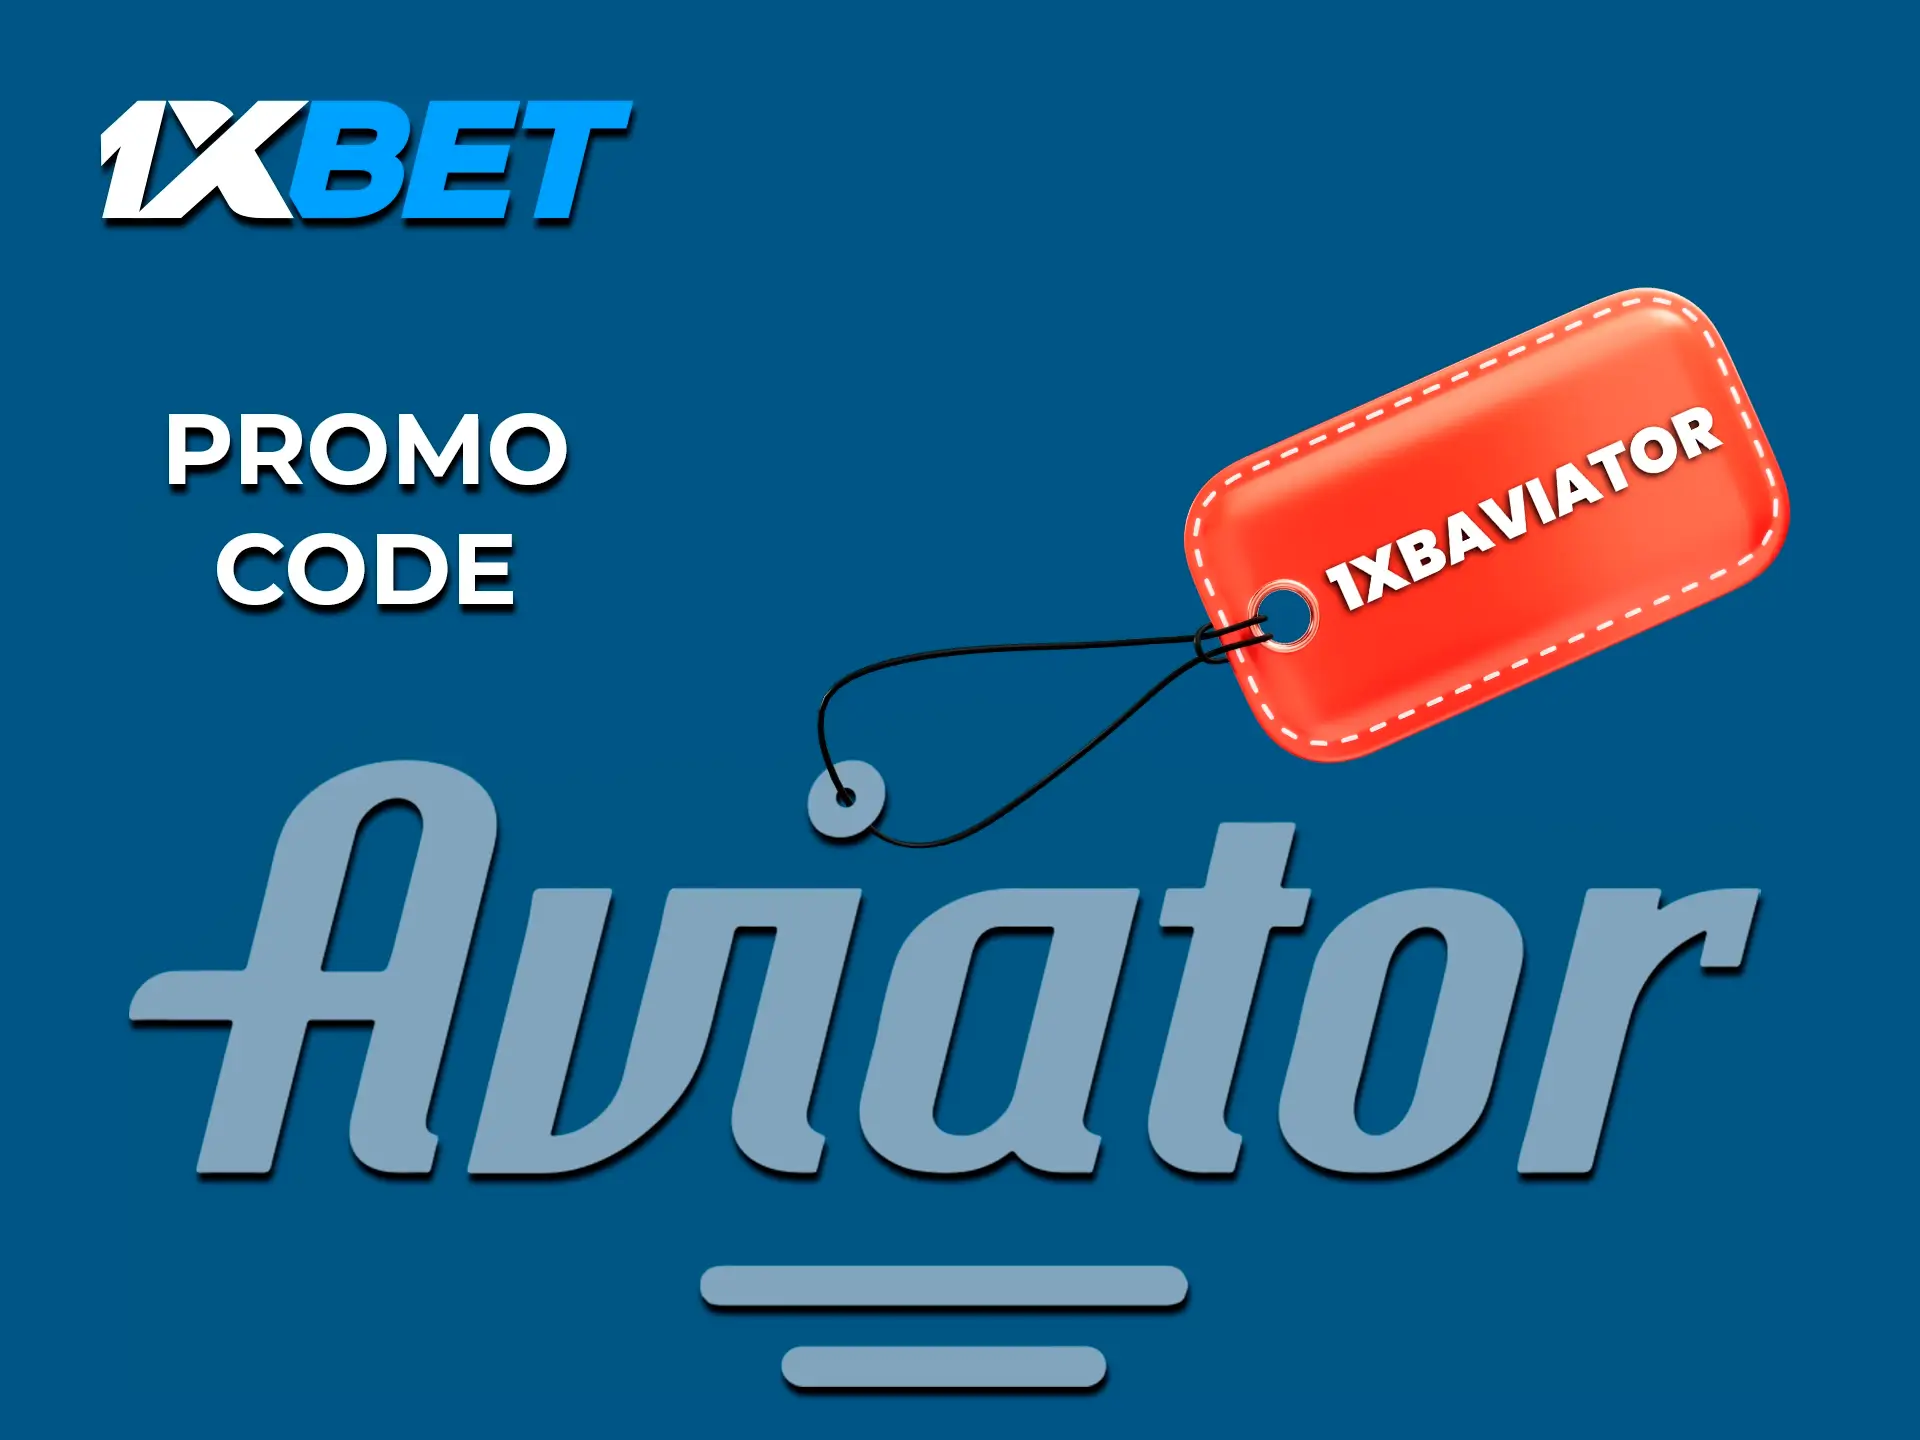 Use a promo code from 1xBet to increase your winnings in the Aviator game.